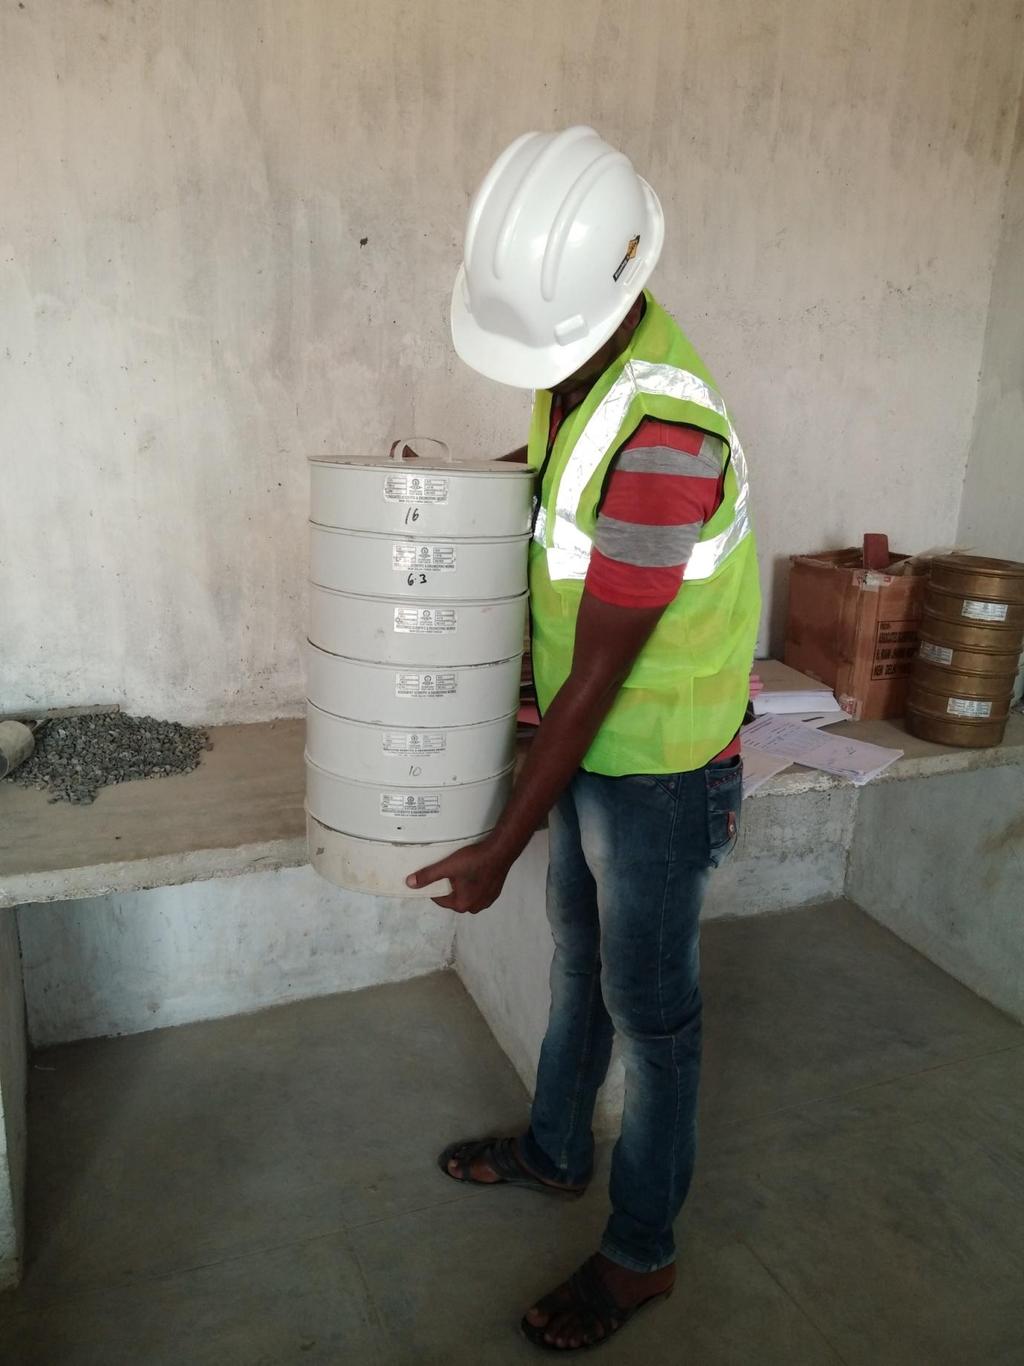 20mm & 12mm Aggregate Sieve Analysis Testing